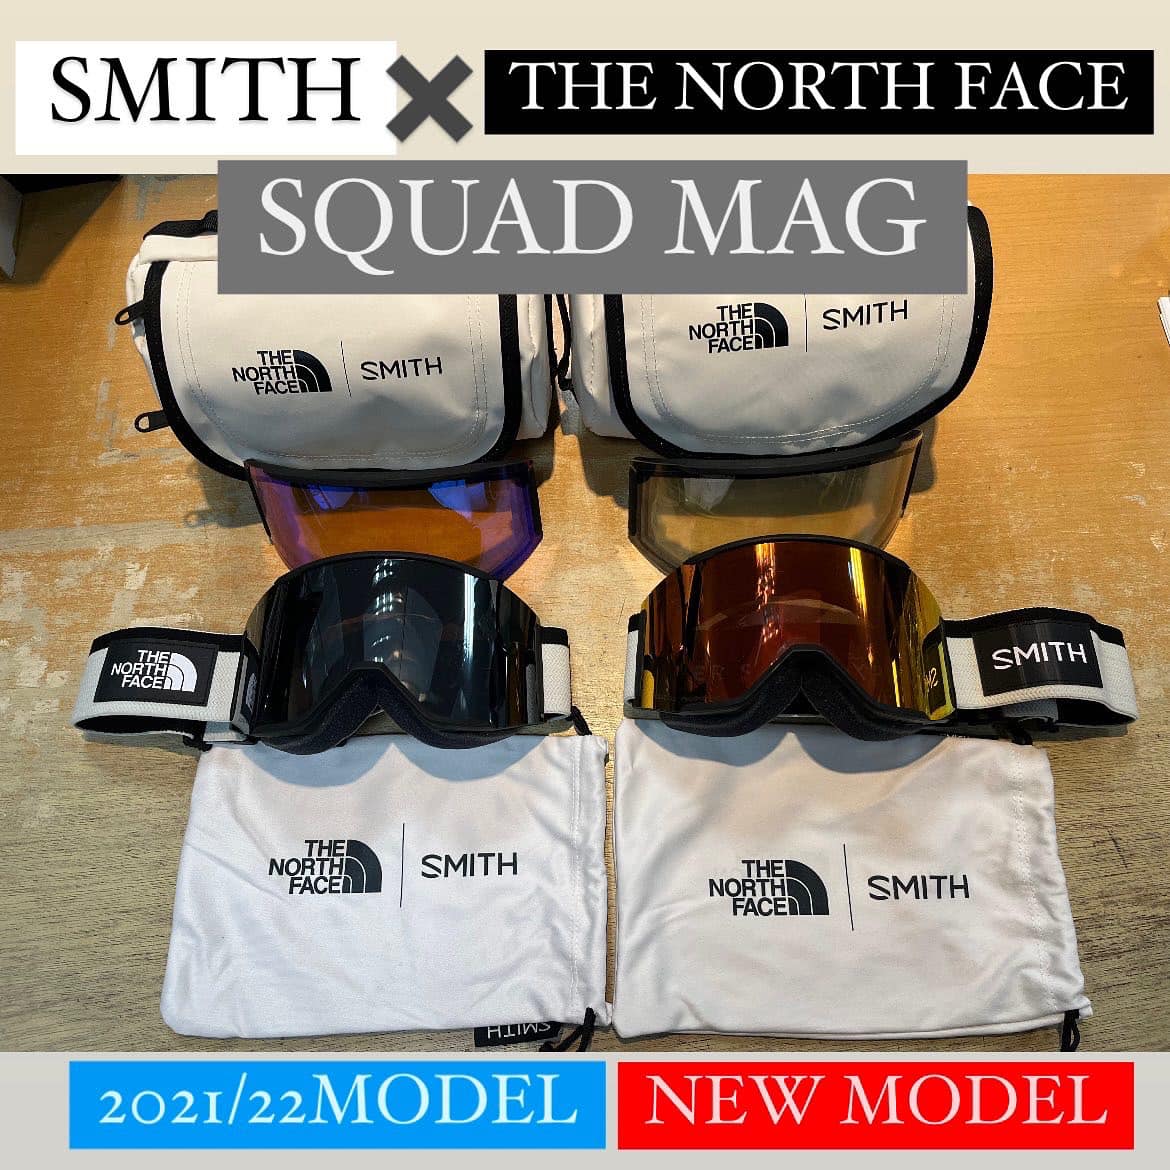 THE NORTH FACE×SMITHゴーグル入荷！ |